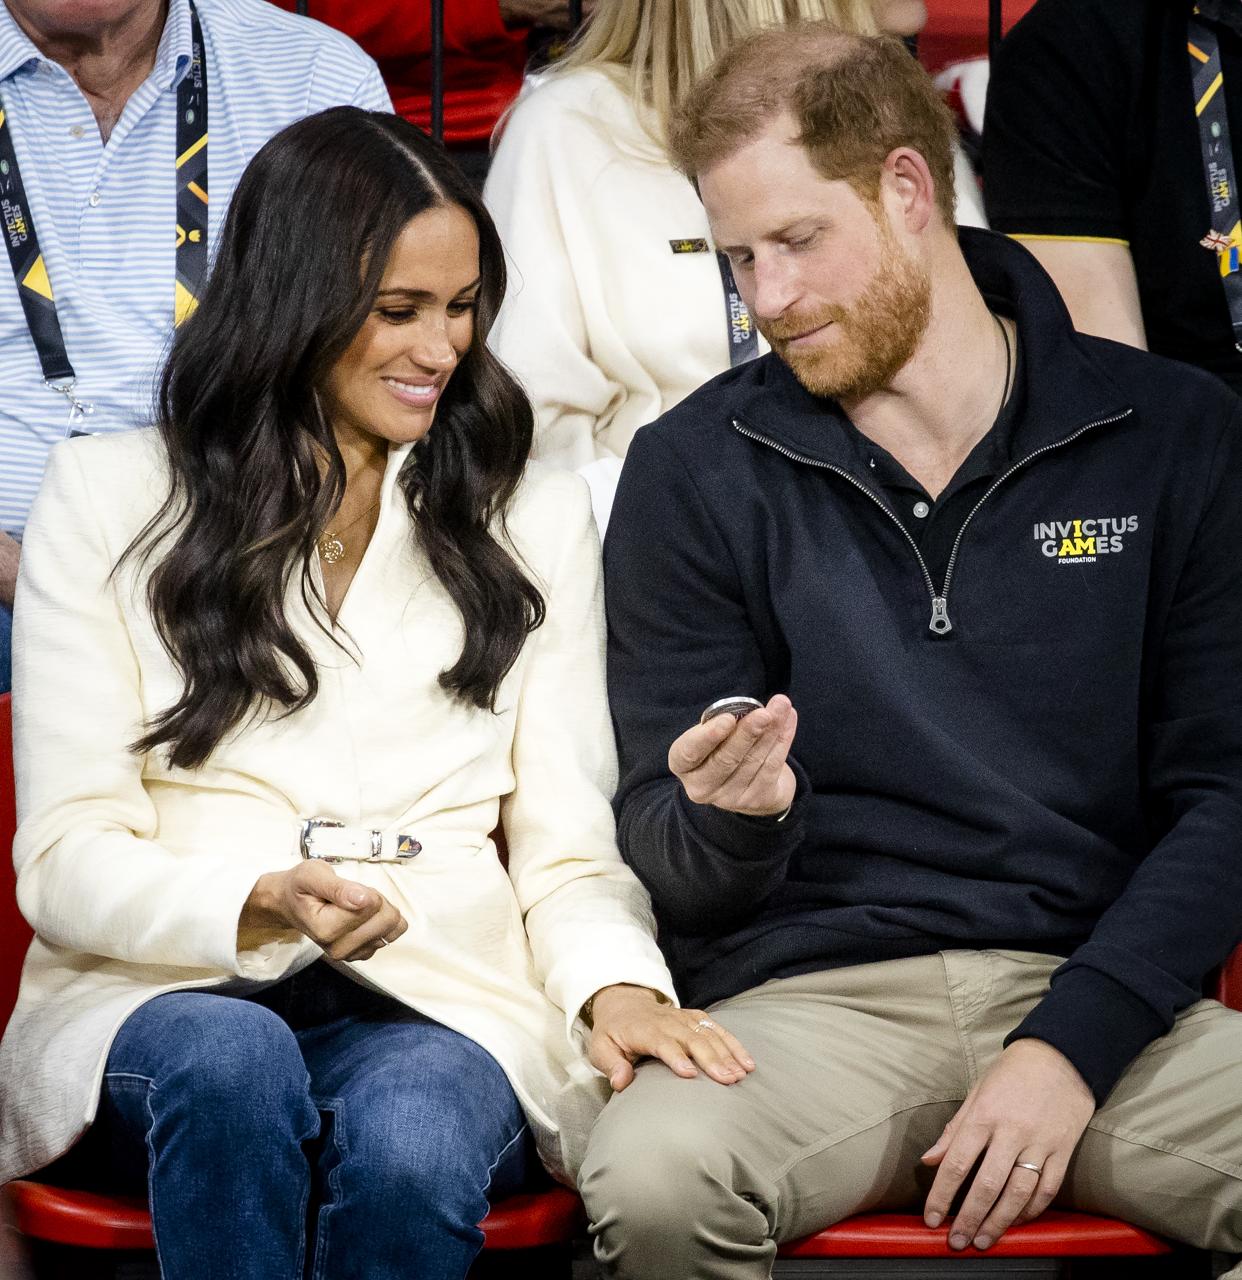 The Duke and Duchess of Sussex at the Invictus Games in the Hague